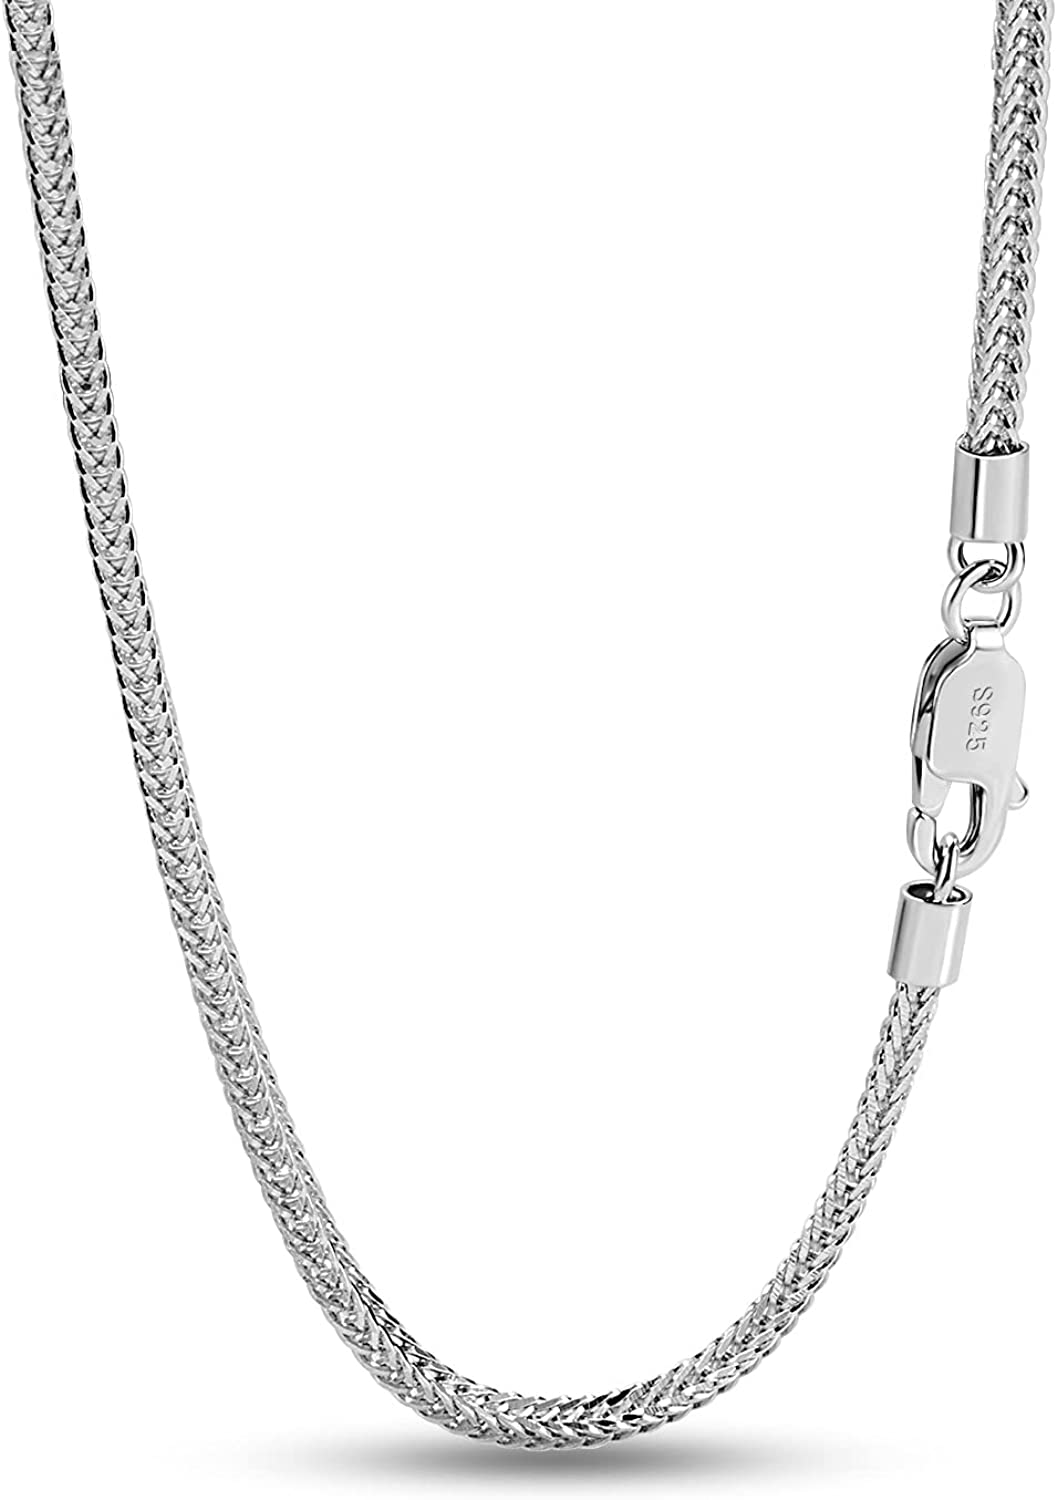 Sterling Silver Foxtail Chains: A Timeless Accessory for All Occasions